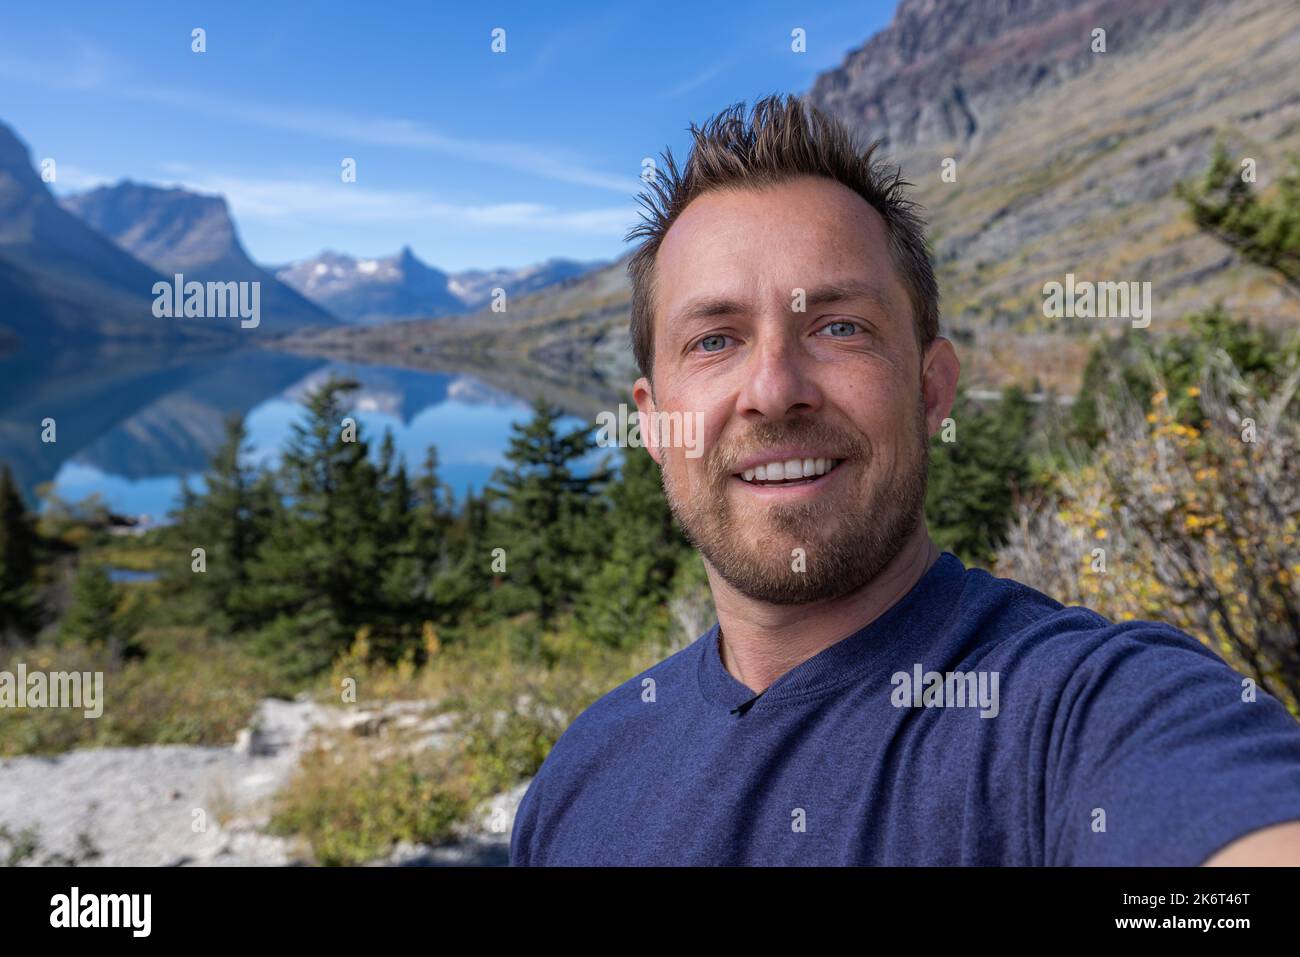 Young man taking a selfie at the St Mary viewpoint in glacier National Park with beautiful calm conditions Stock Photo